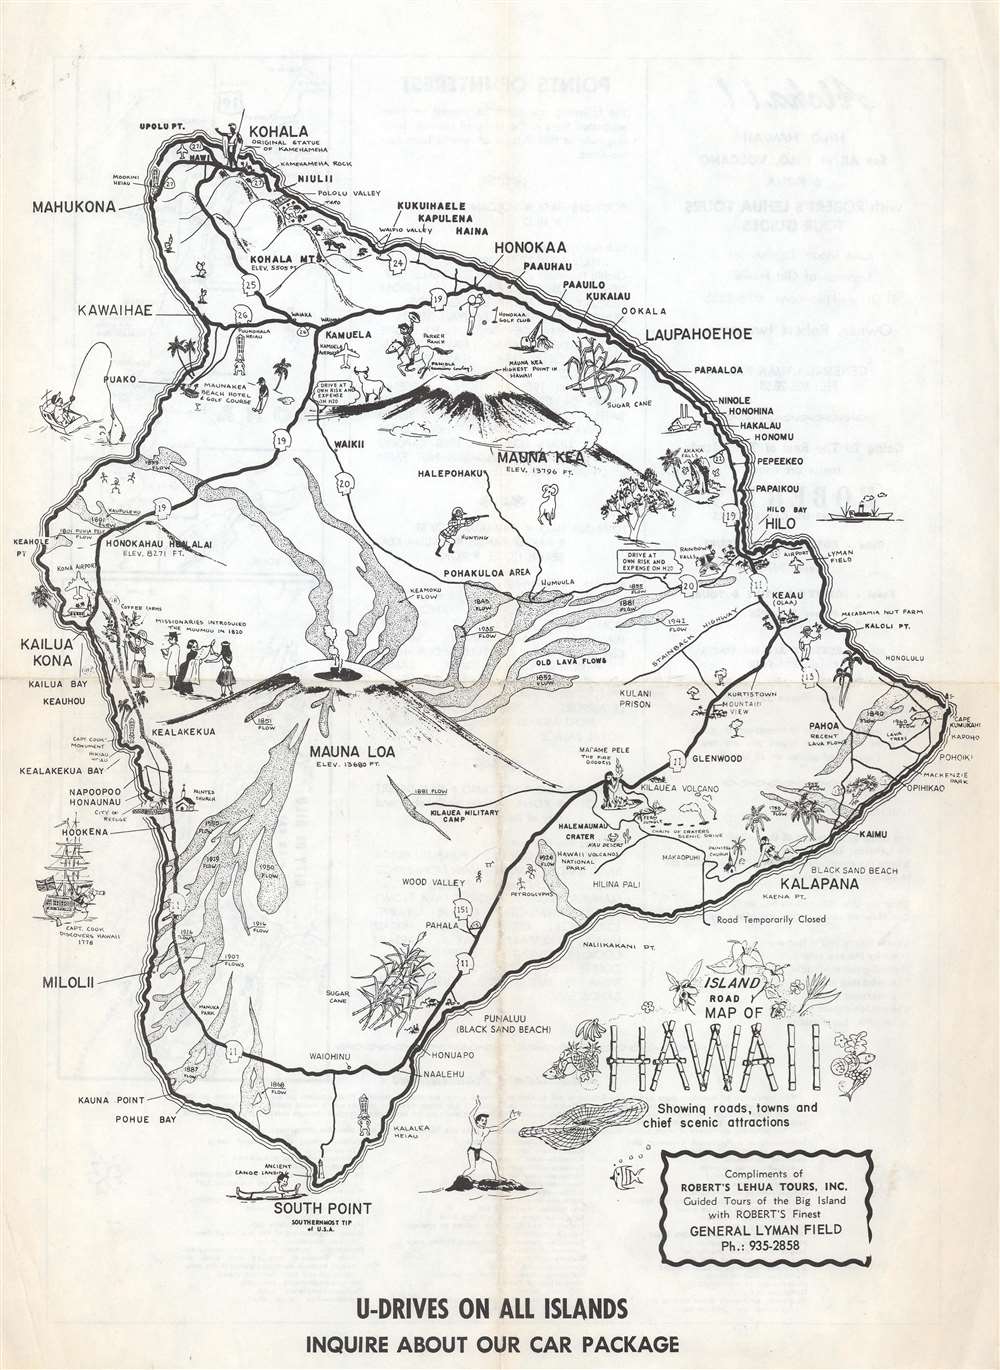 1976 Lehua Tours Pictorial Road Map of Hawaii